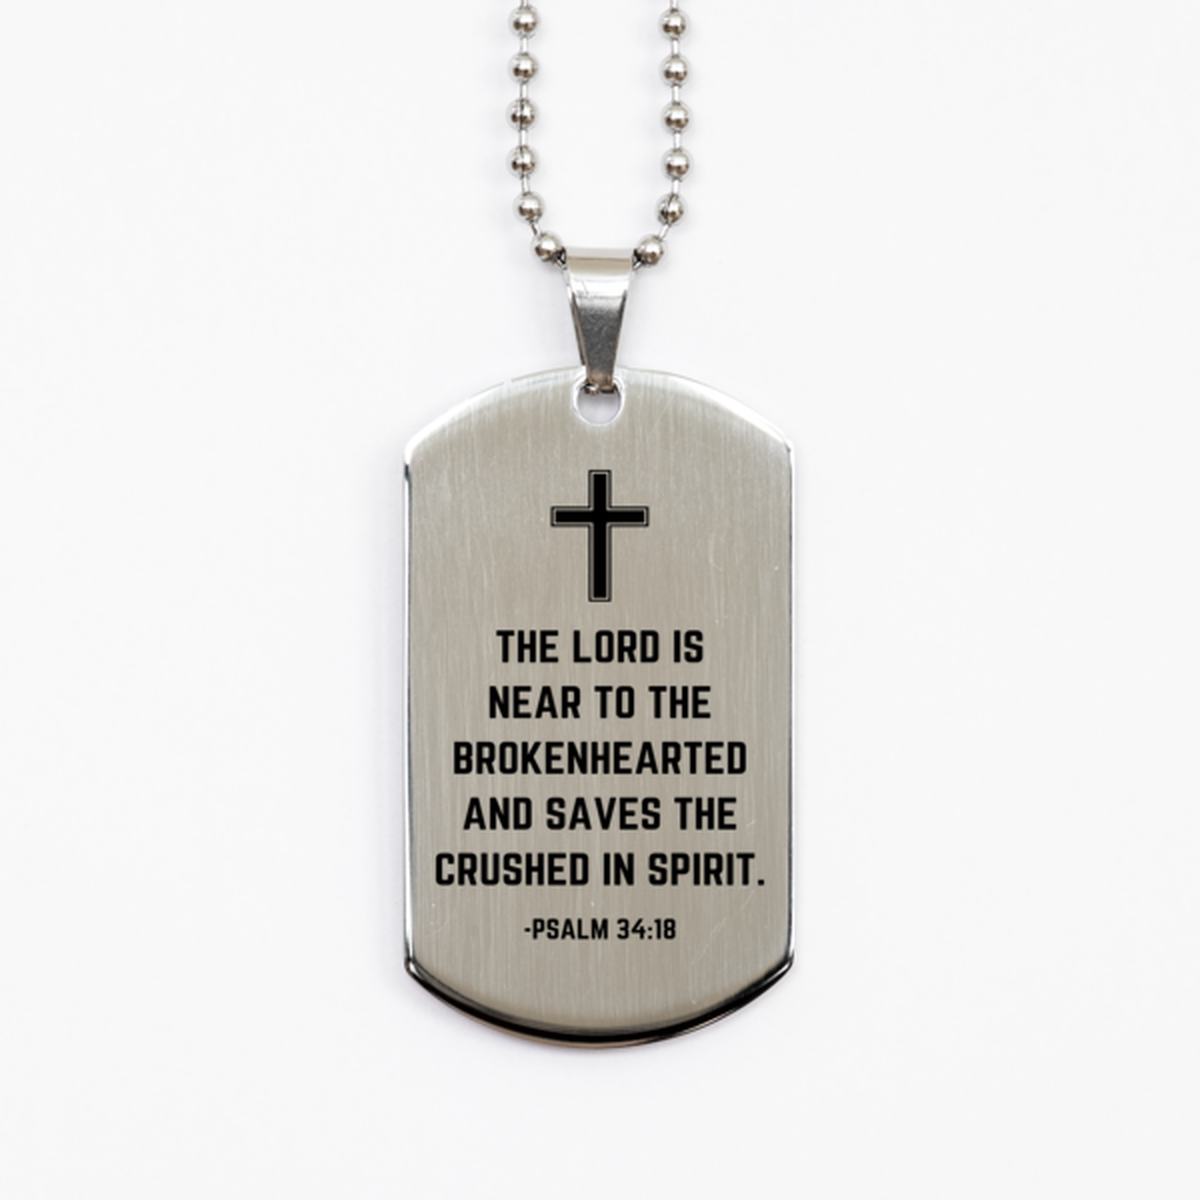 Baptism Gifts For Teenage Boys Girls, Christian Bible Verse Silver Dog Tag, The Lord is near to the brokenhearted, Confirmation Gifts, Bible Verse Necklace for Son, Godson, Grandson, Nephew